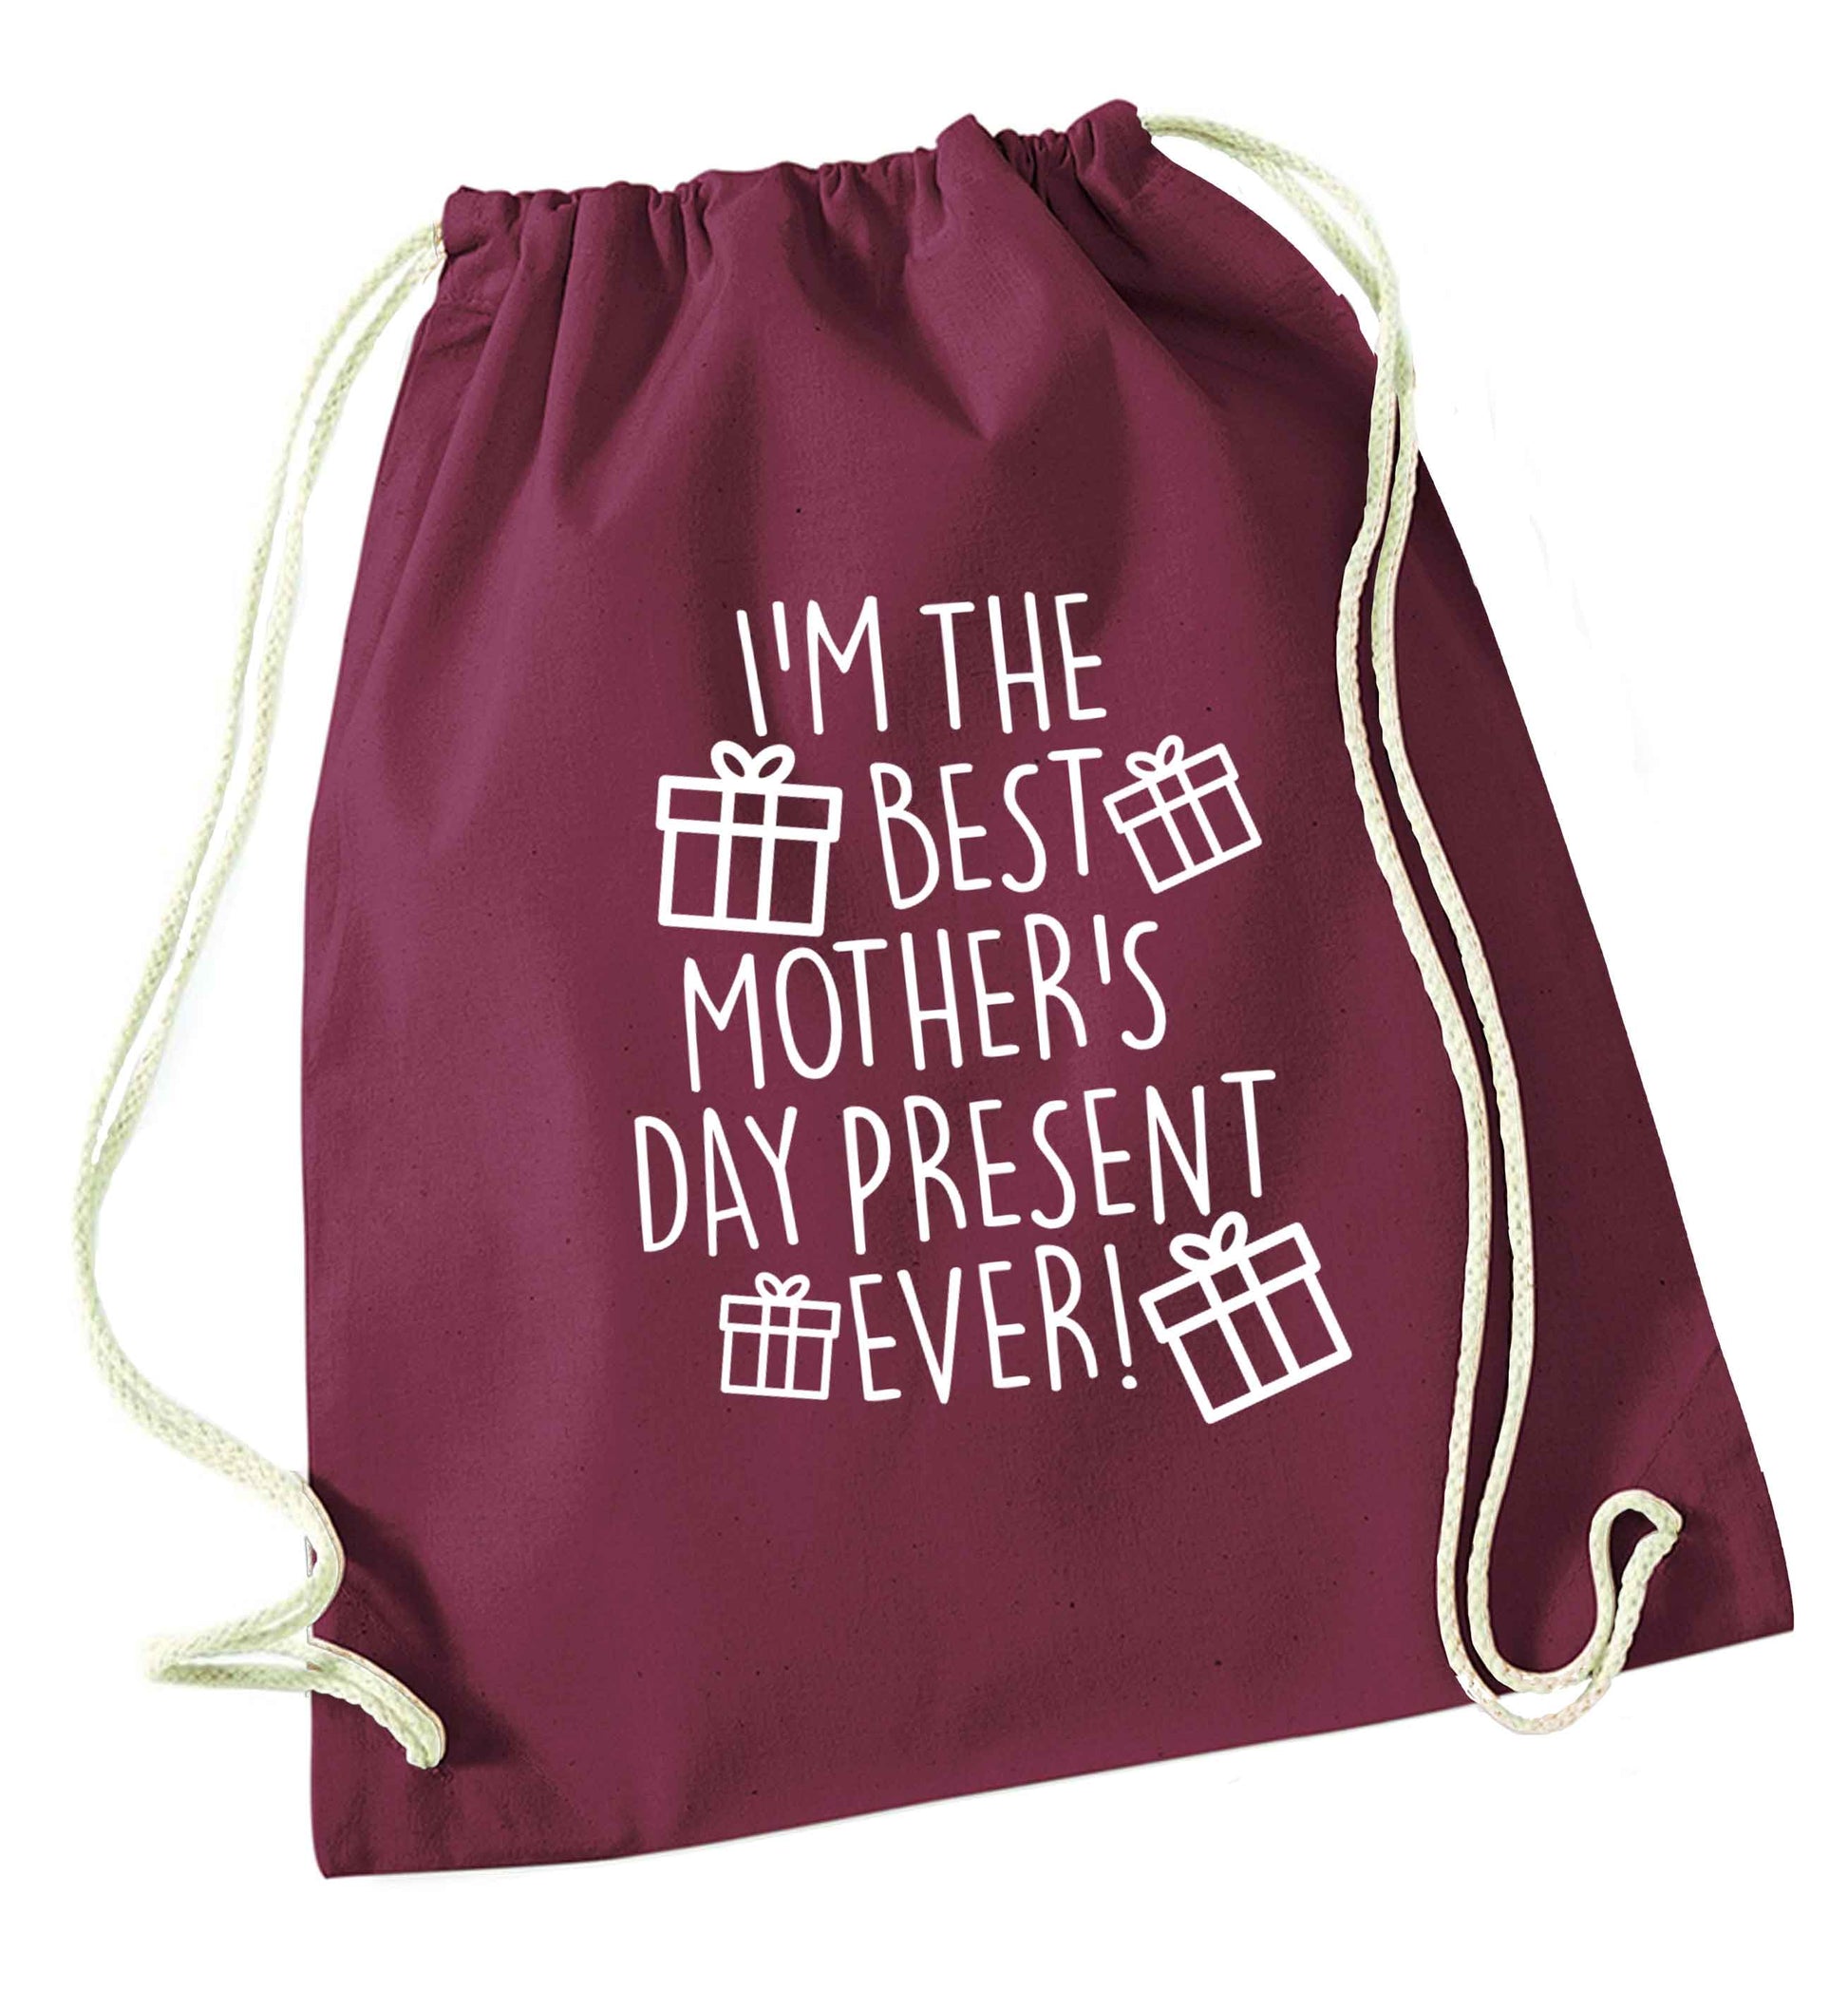 I'm the best mother's day present ever! maroon drawstring bag